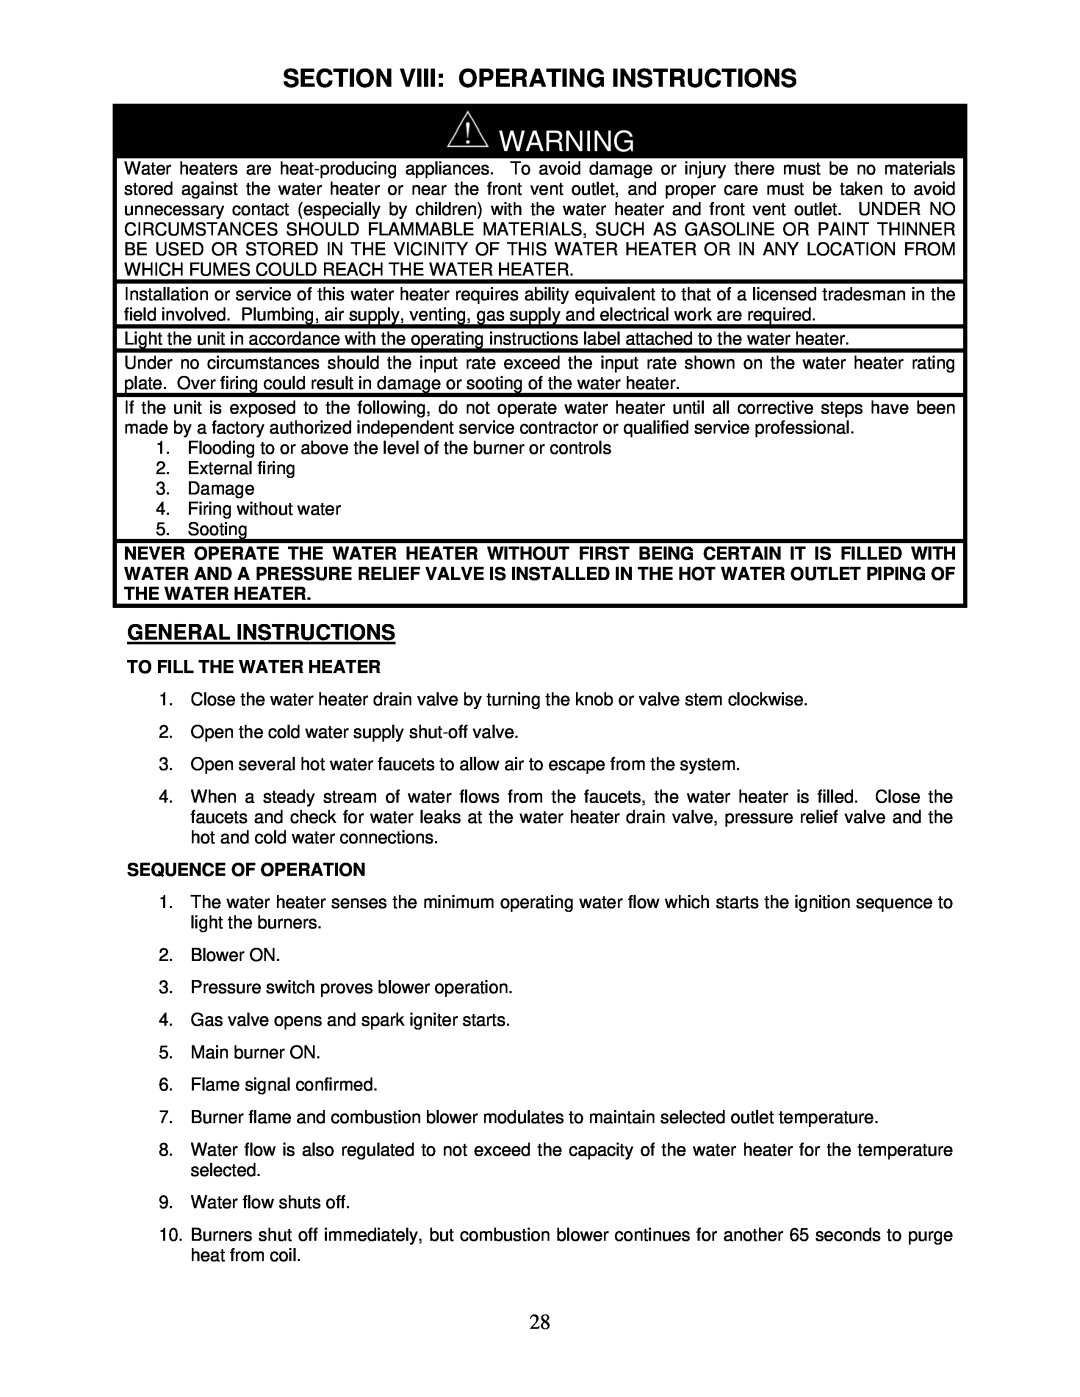 Bradford-White Corp IGE-199R Series Section Viii Operating Instructions, General Instructions, To Fill The Water Heater 